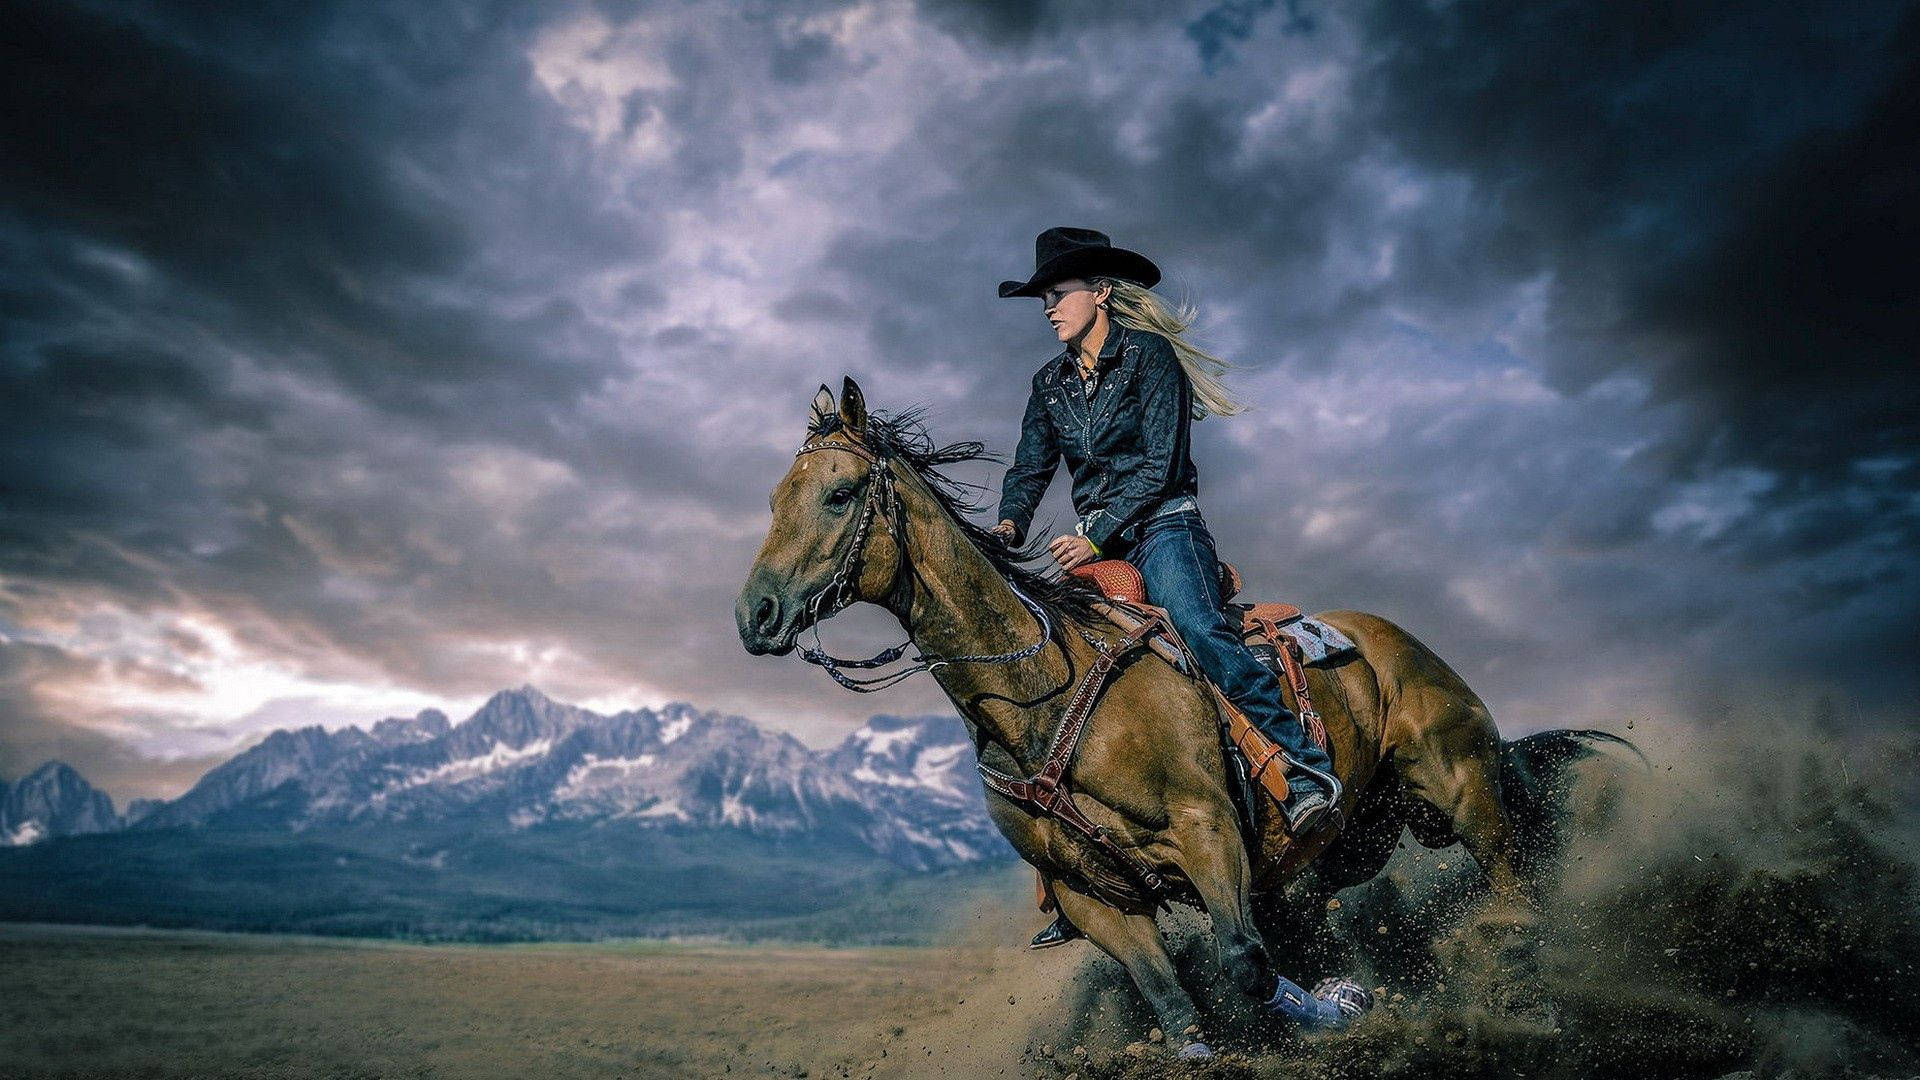 Cowgirl Riding A Horse Through Storm Background